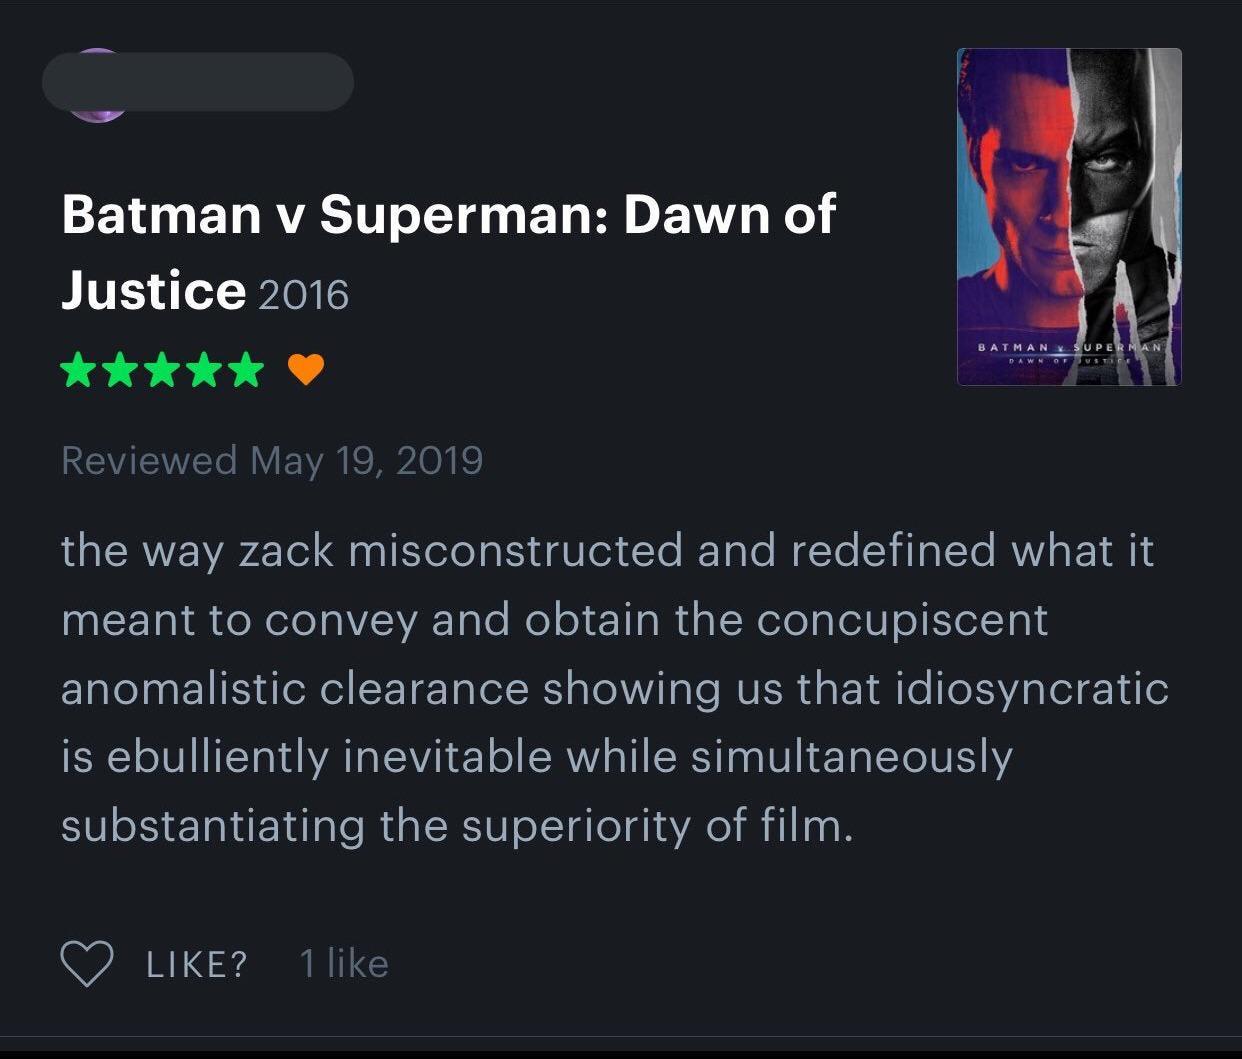 presentation - Batman v Superman Dawn of Justice 2016 Batman V Superman Not Reviewed the way zack misconstructed and redefined what it meant to convey and obtain the concupiscent anomalistic clearance showing us that idiosyncratic is ebulliently inevitabl